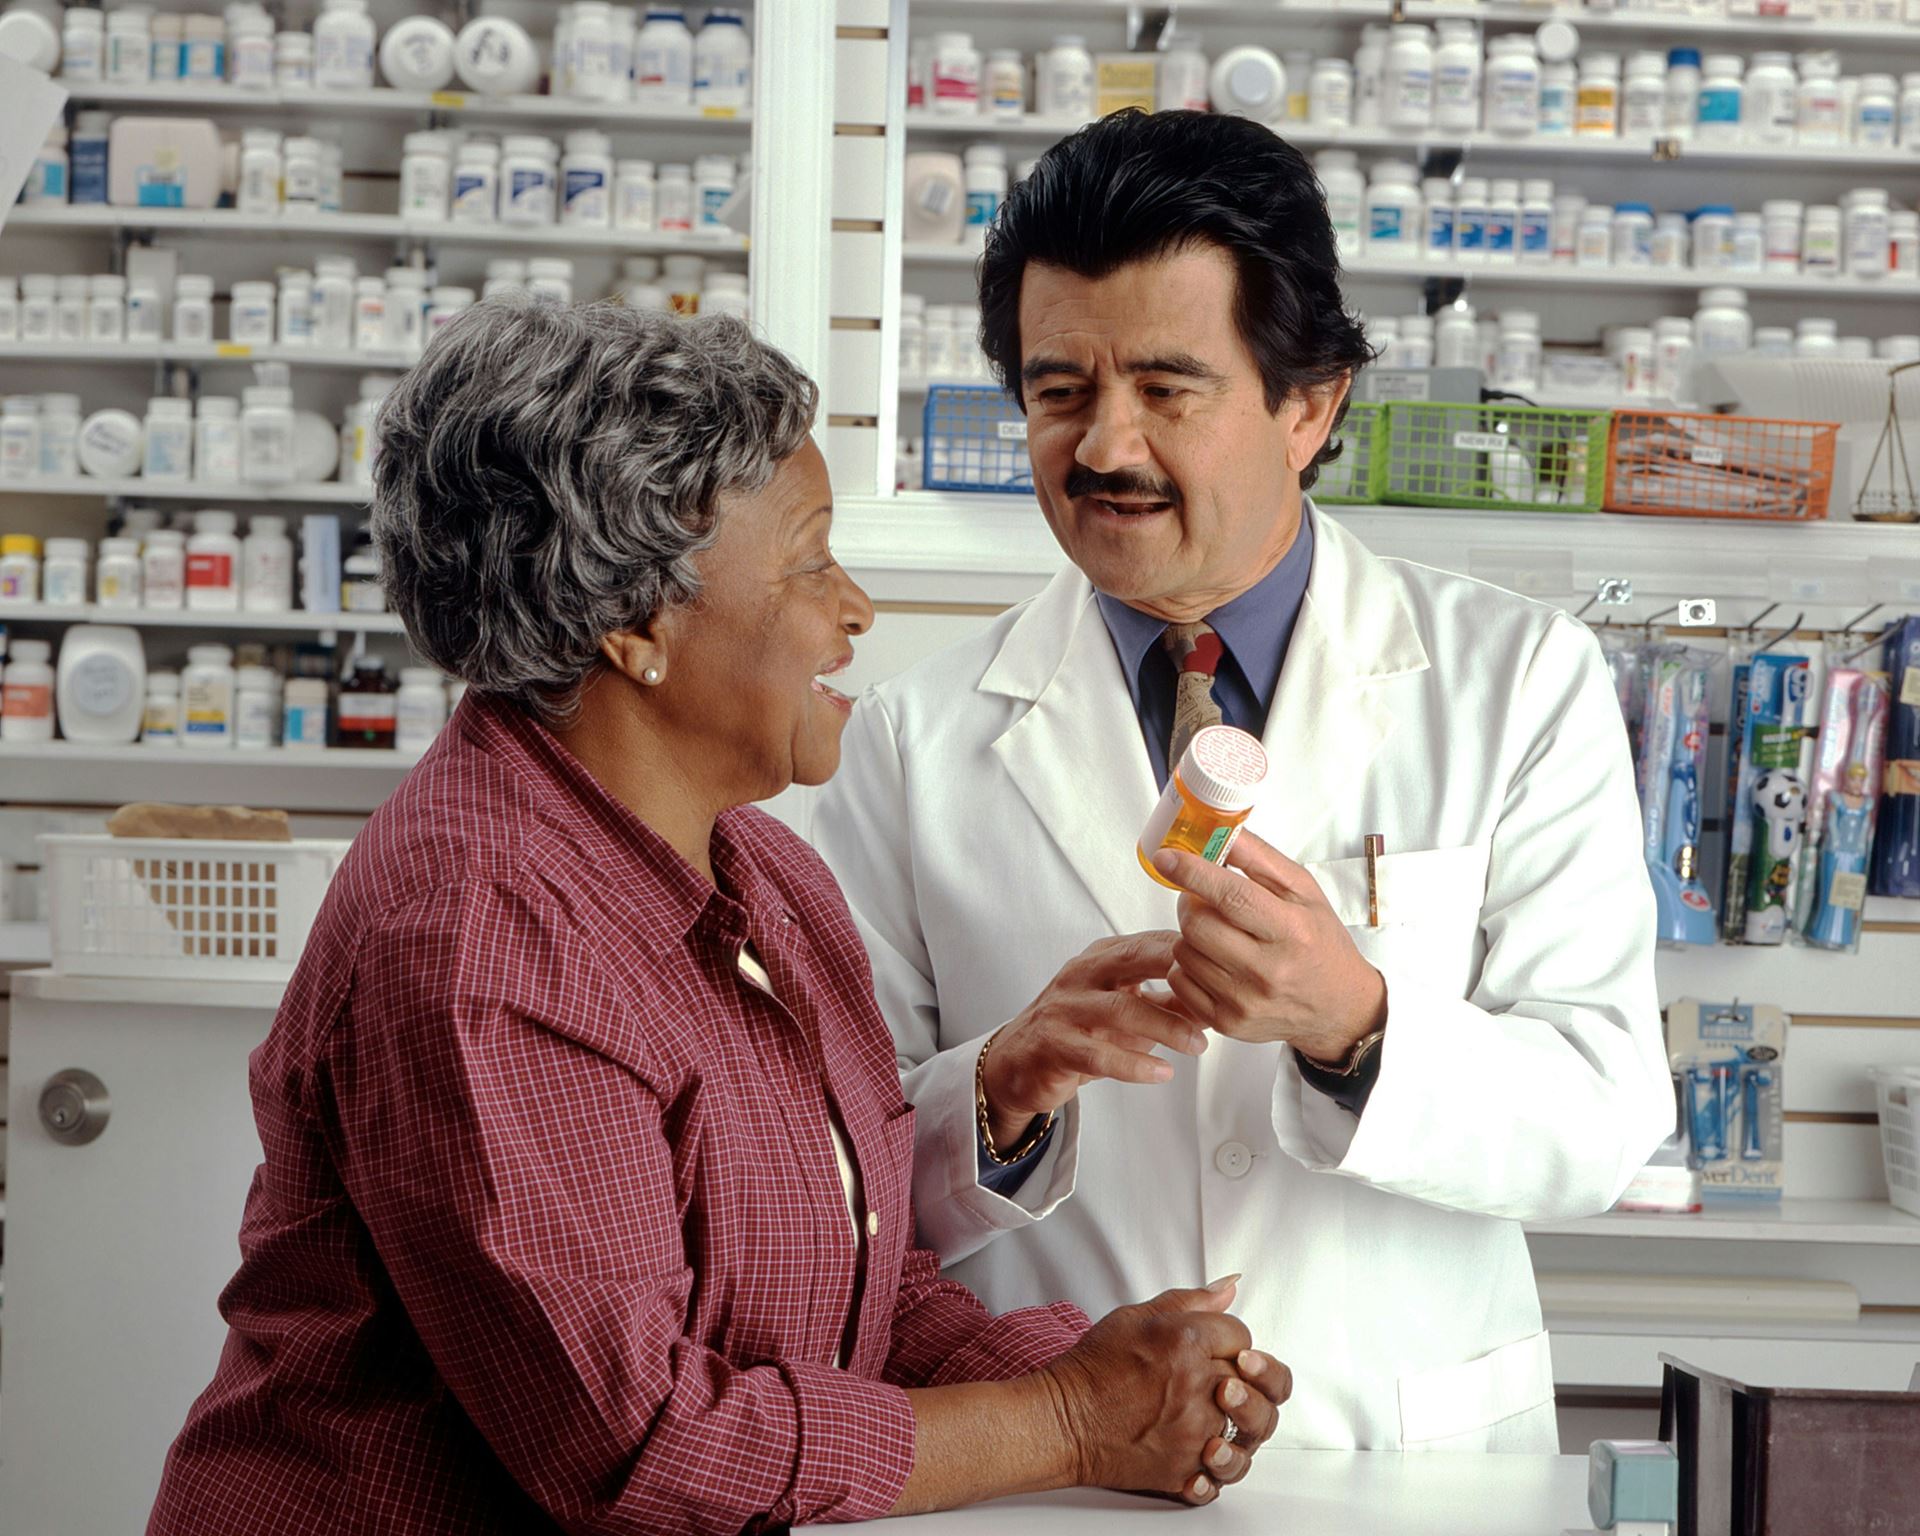 pharmacist providing medication to a patient 